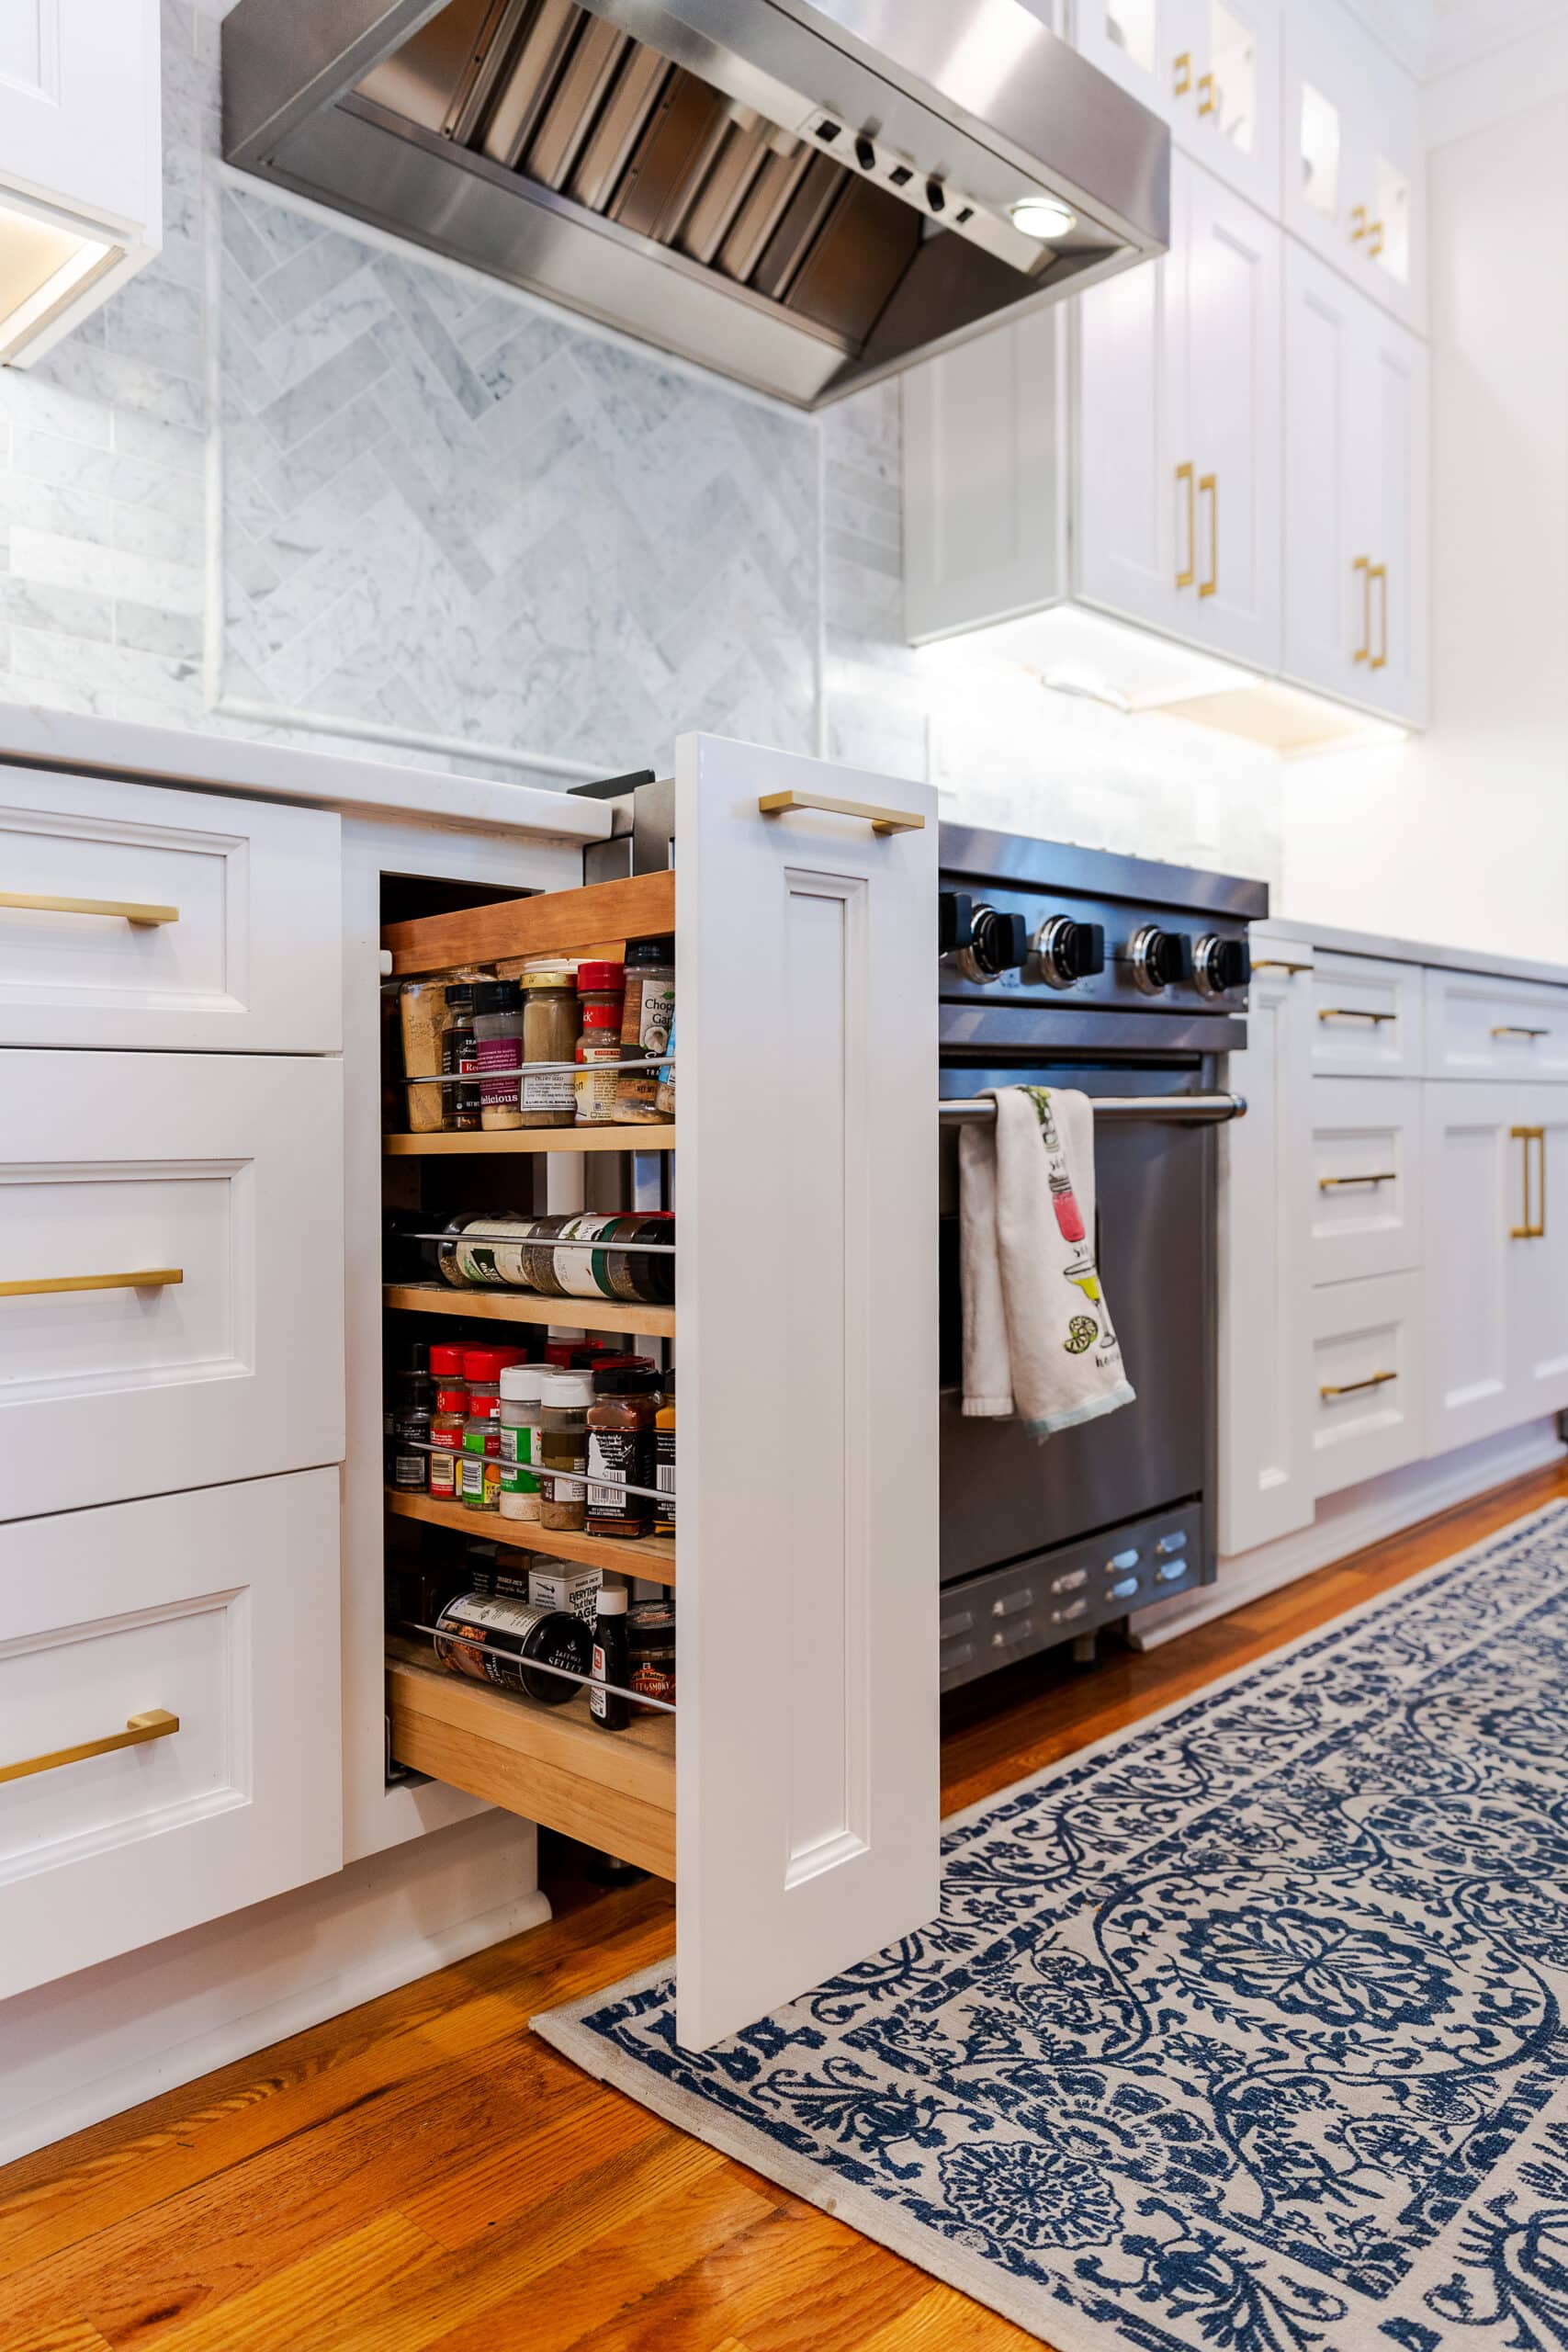 A White kitchen cabinets and condiments rack cabinet